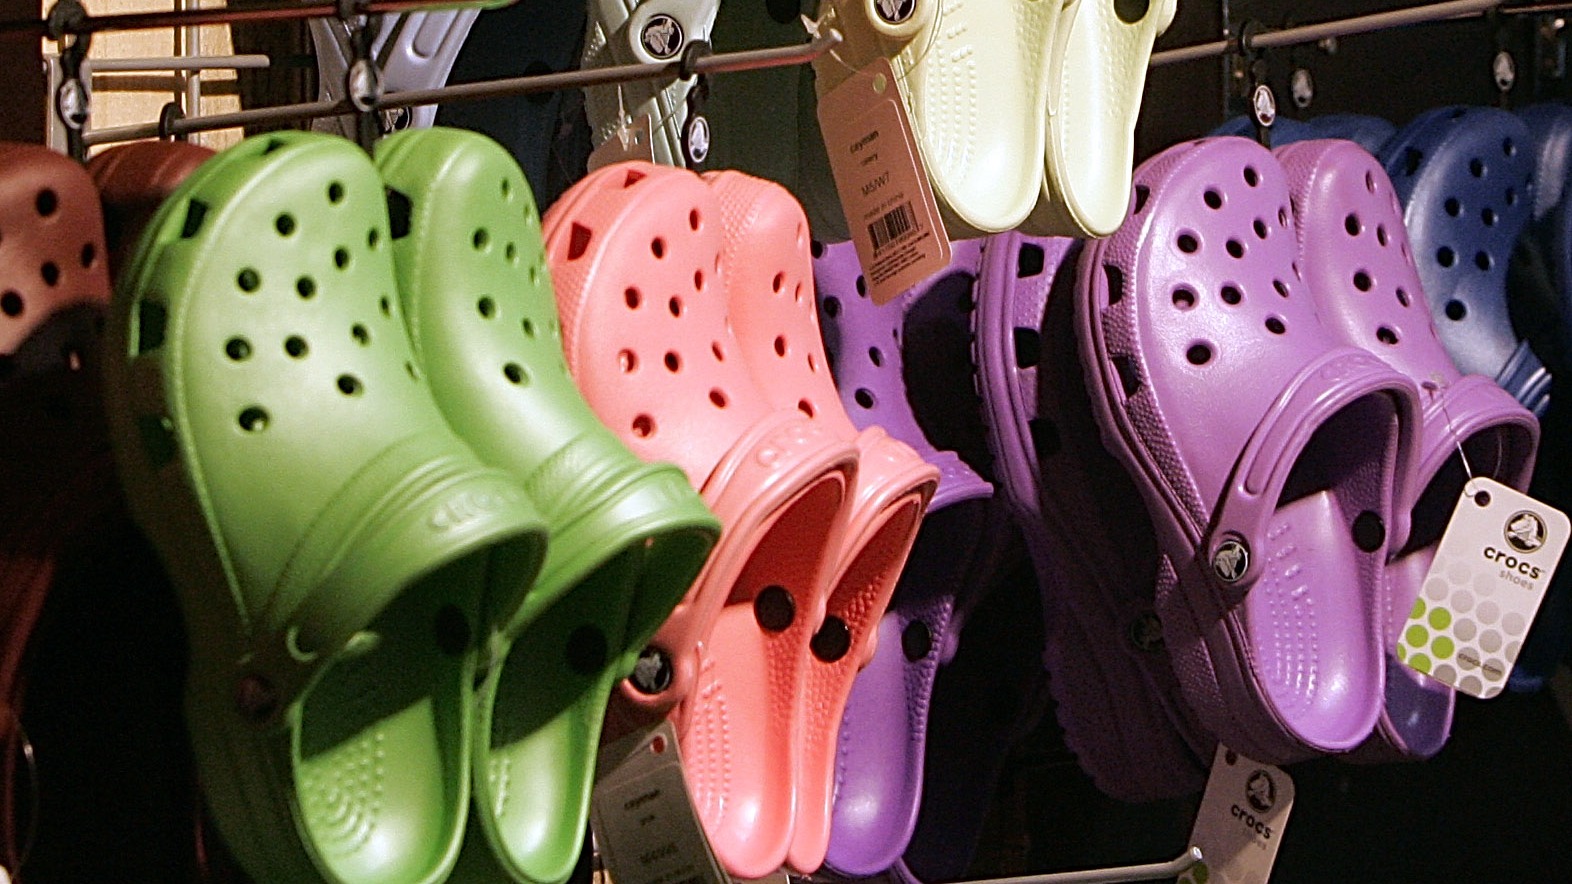 Crocs enjoys soaring sales as Covid pandemic upends shoe sector | ITV News